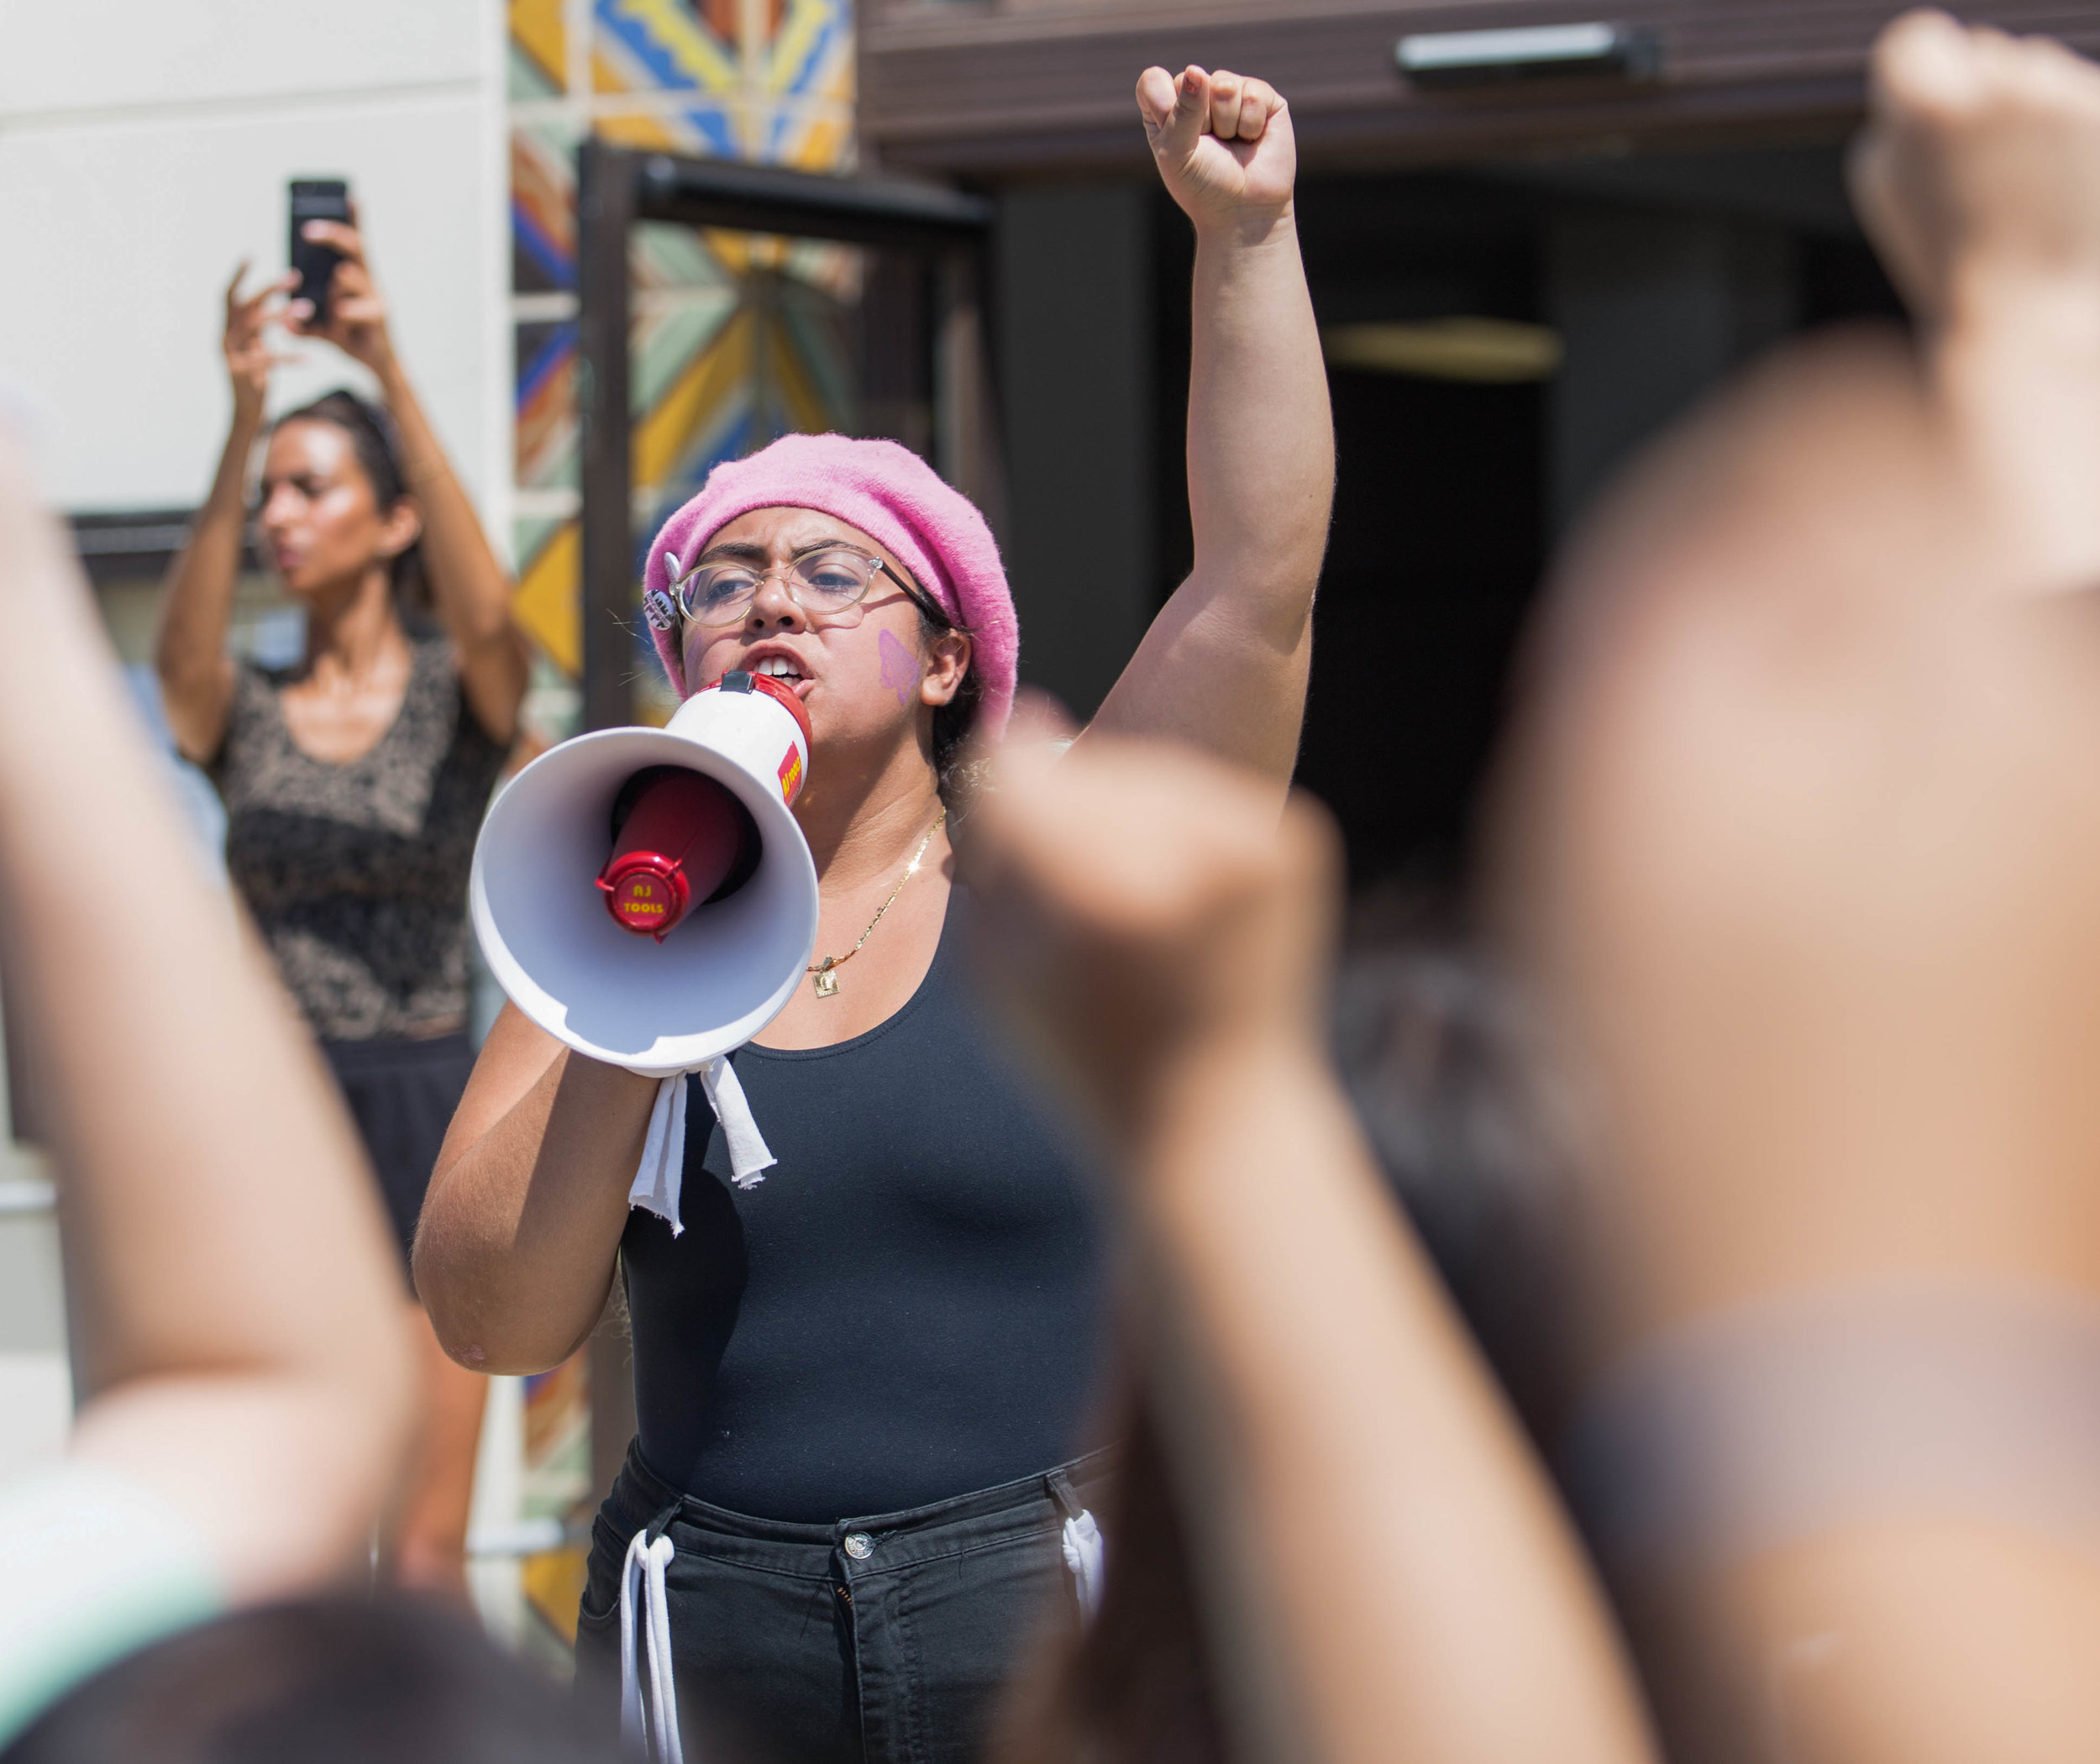  Estephanie Guardudo uses her Megaphone to ask protestors to raise their fist, symbolizing the strength they have on the steps of Santa Monica City Hall, Santa Monica, Calif. Estephanie wants members of City Hall to know their protests are strong and